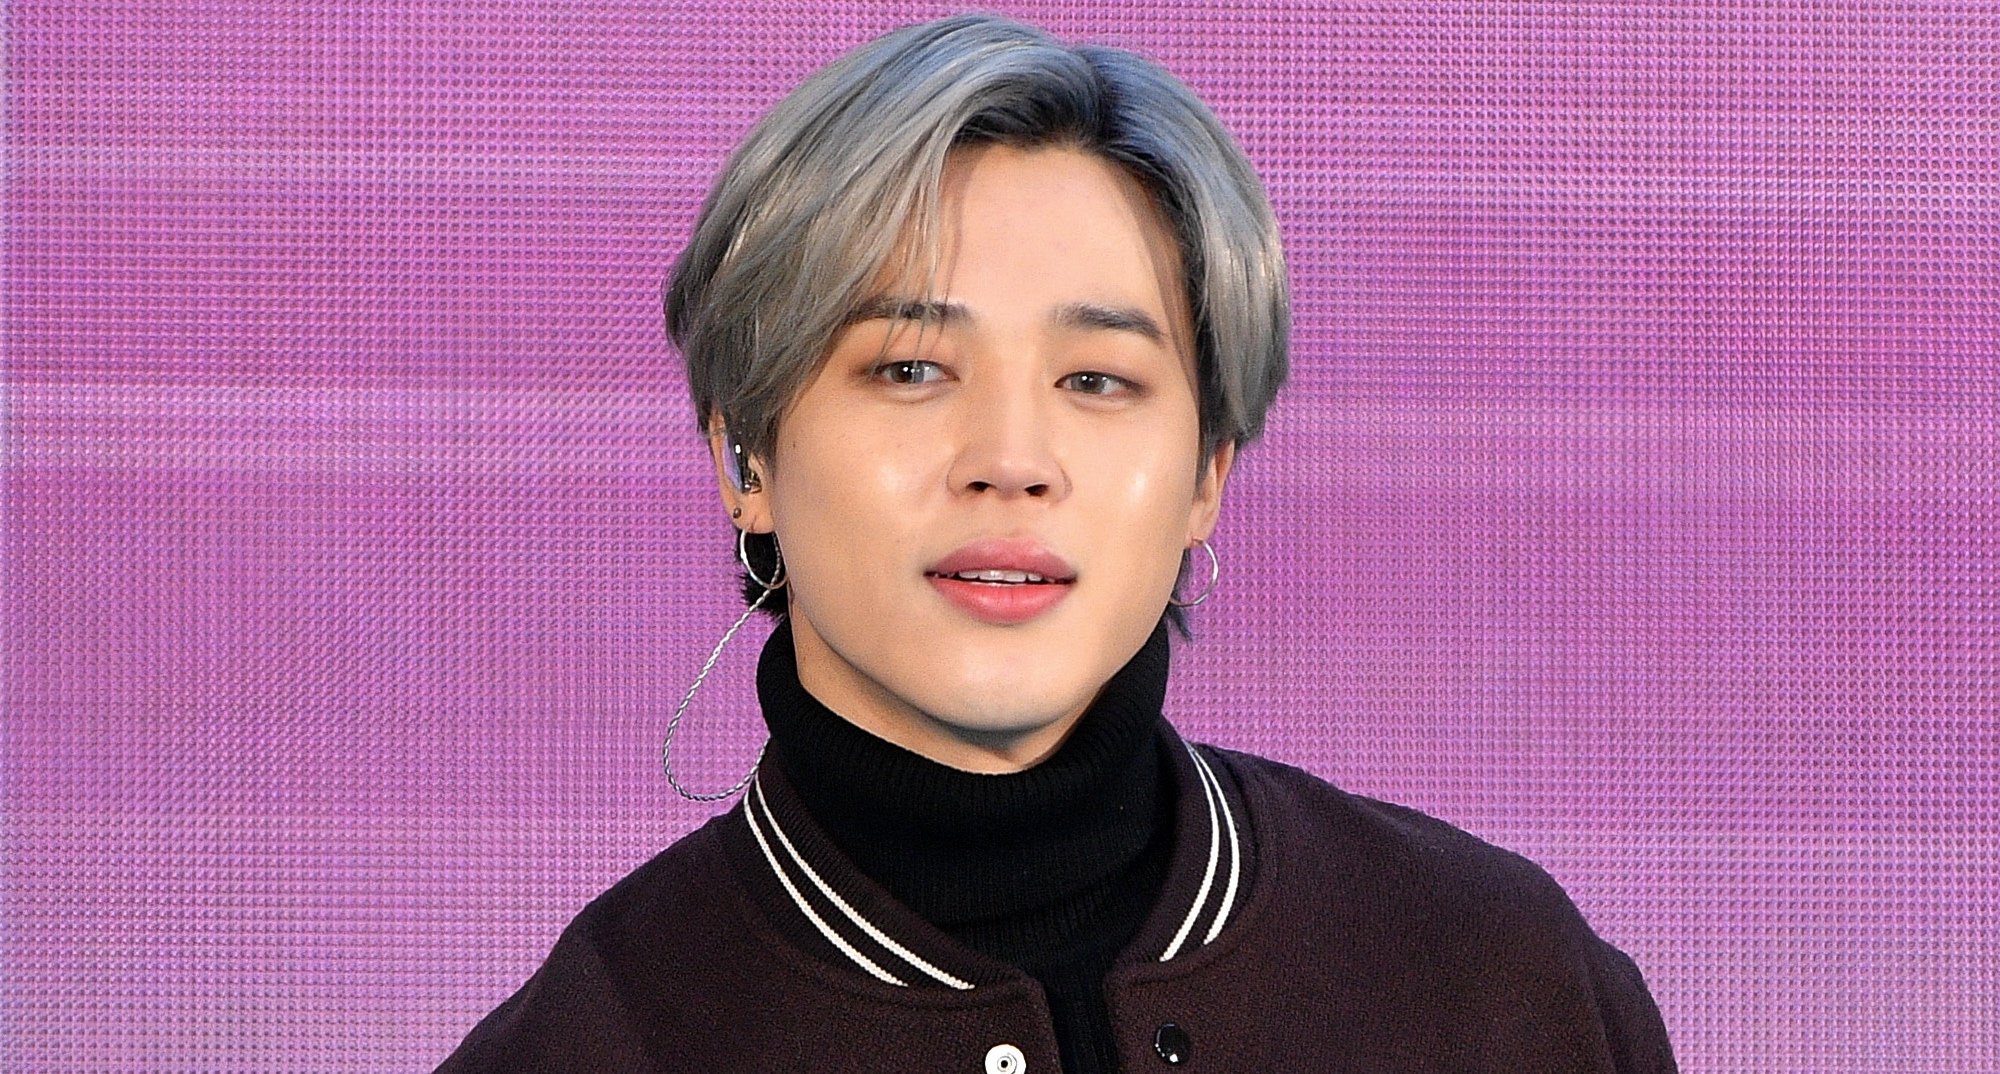 Our Blues': BTS's Jimin to Sing His First OST Song for K-Drama